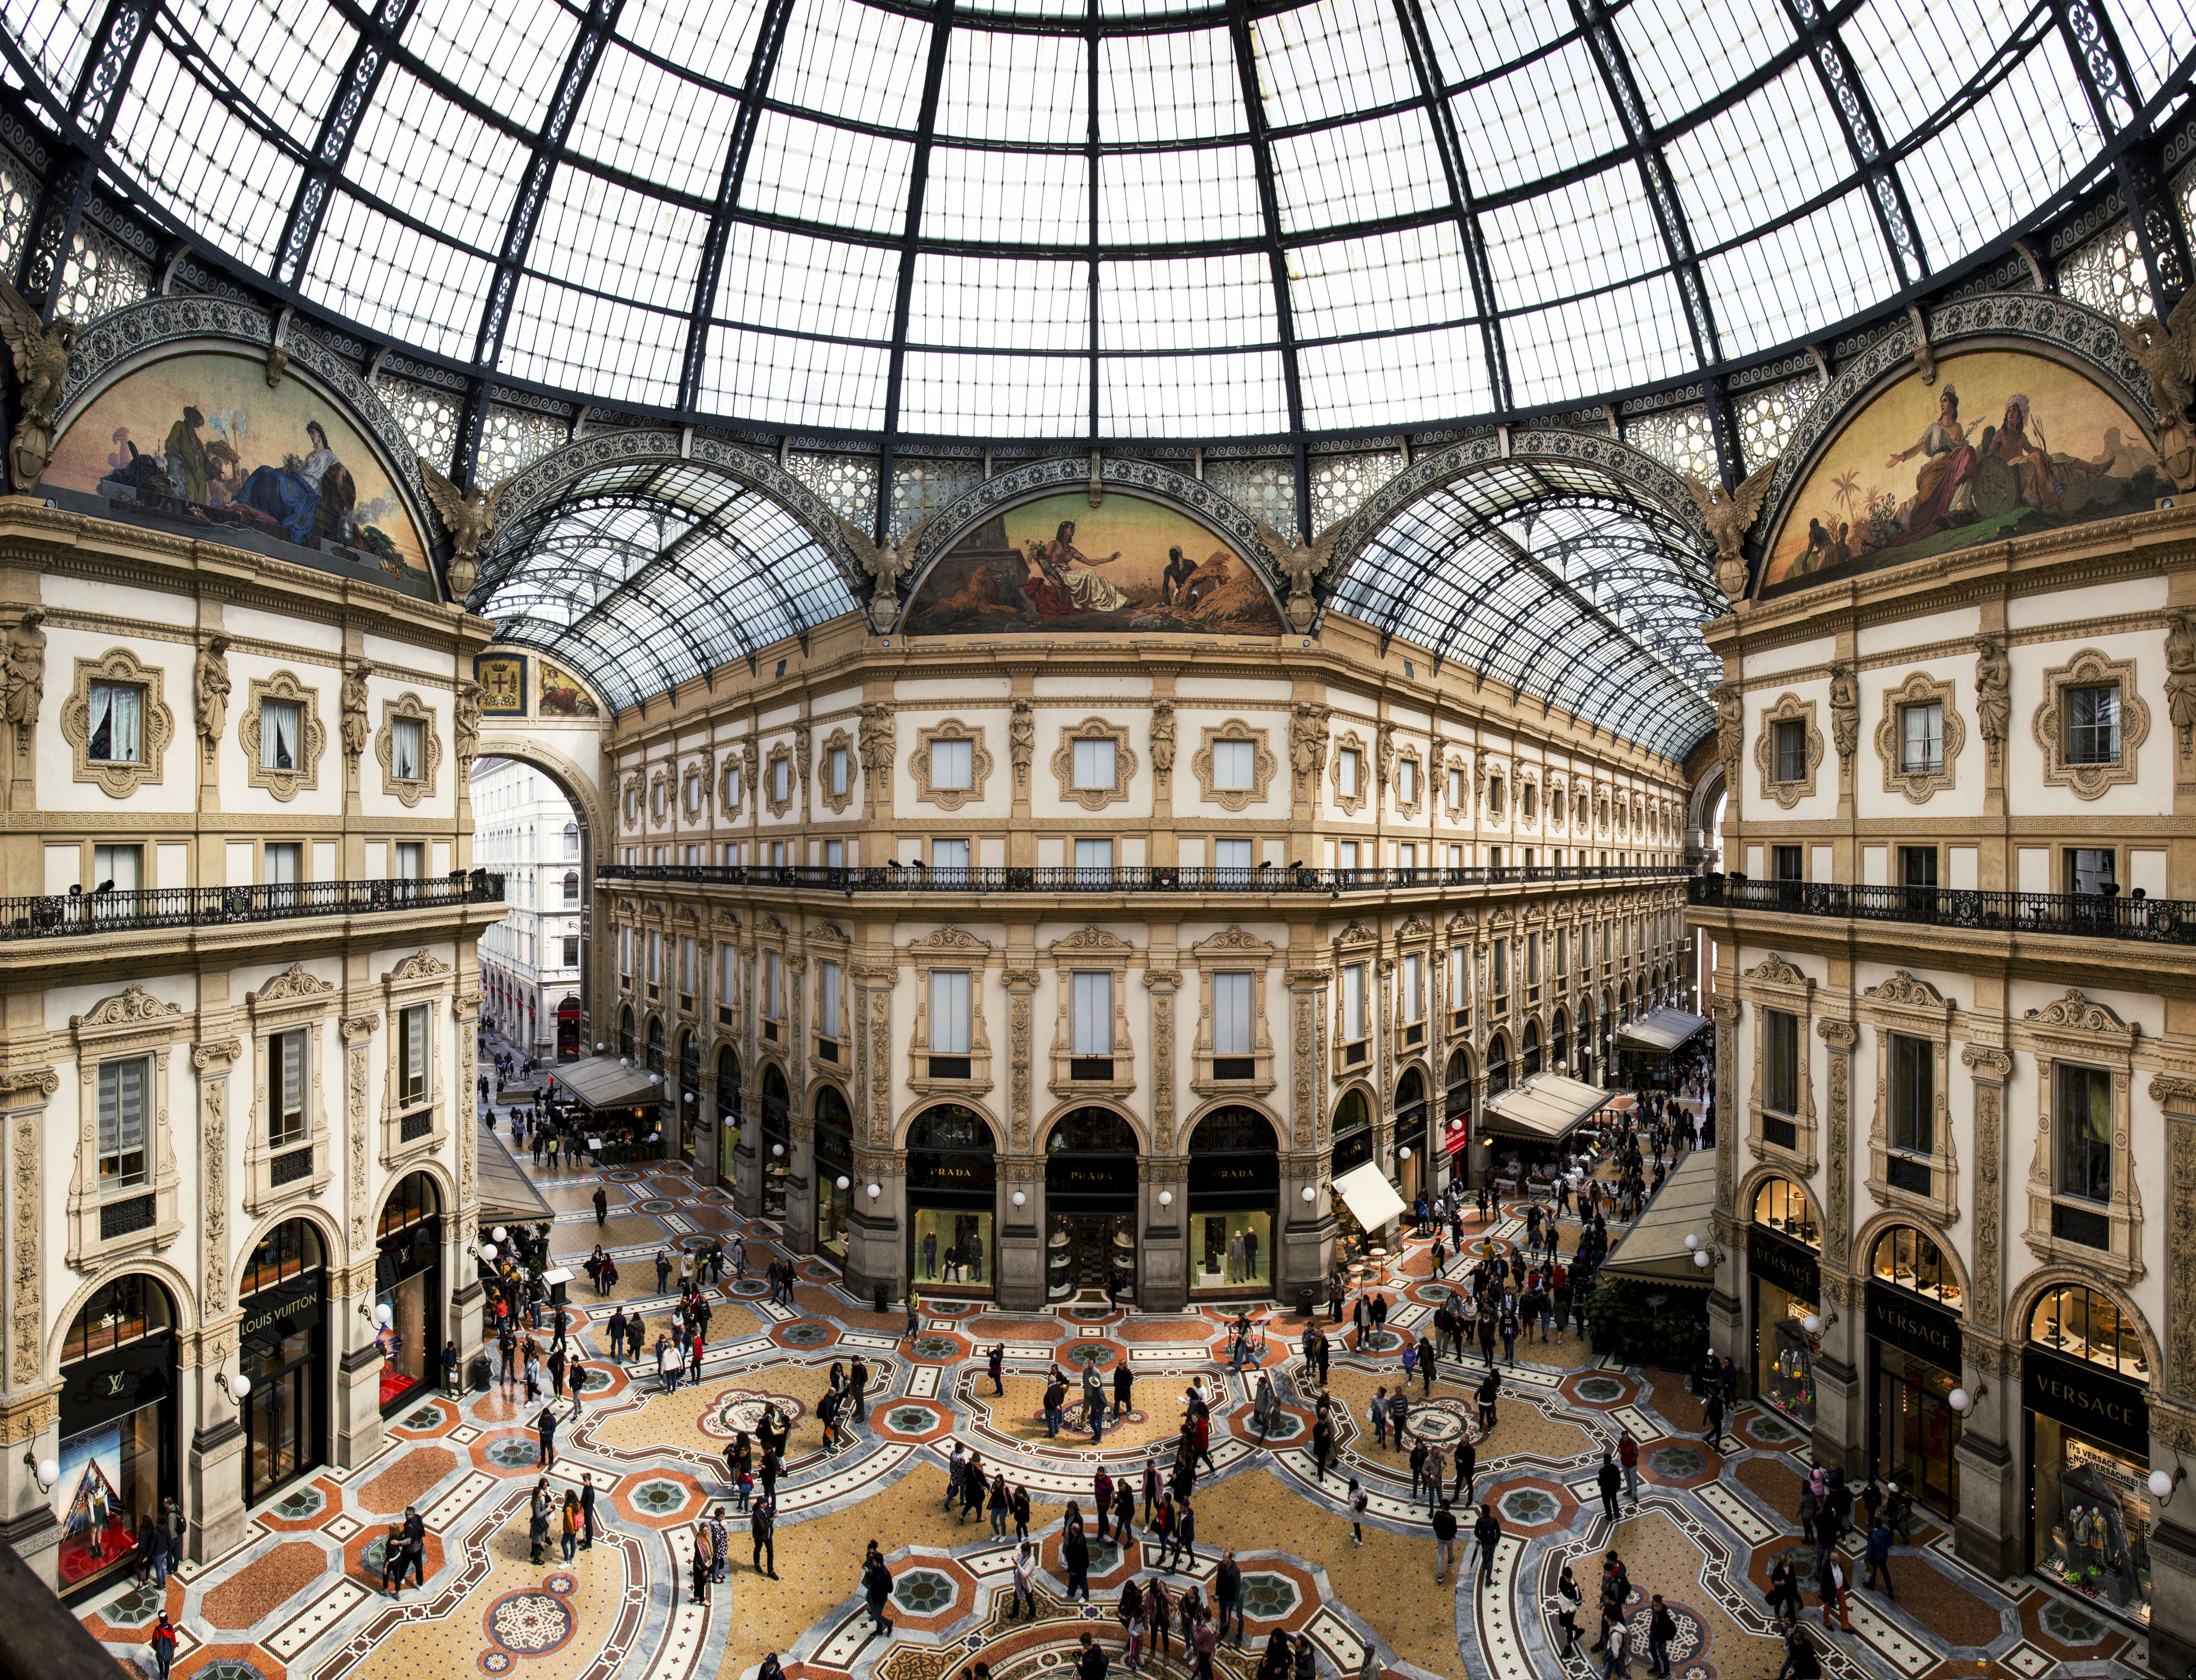 Milano Galleria Vik, a five star hotel embracing art and luxury